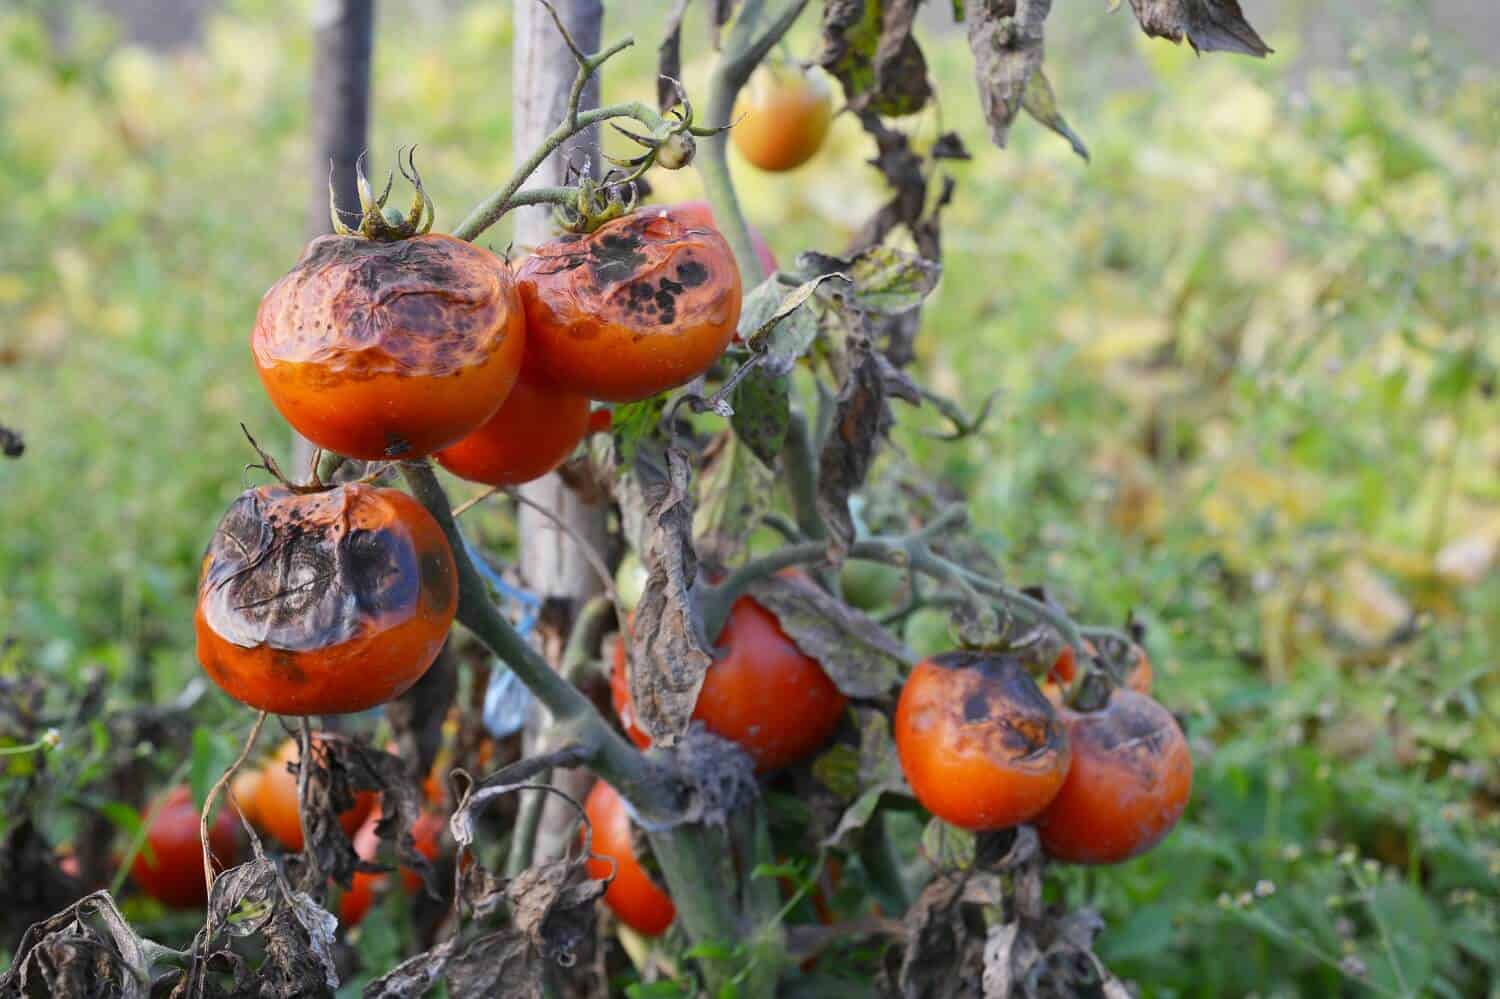 Tomato plant diseases - late blight in tomato fruits